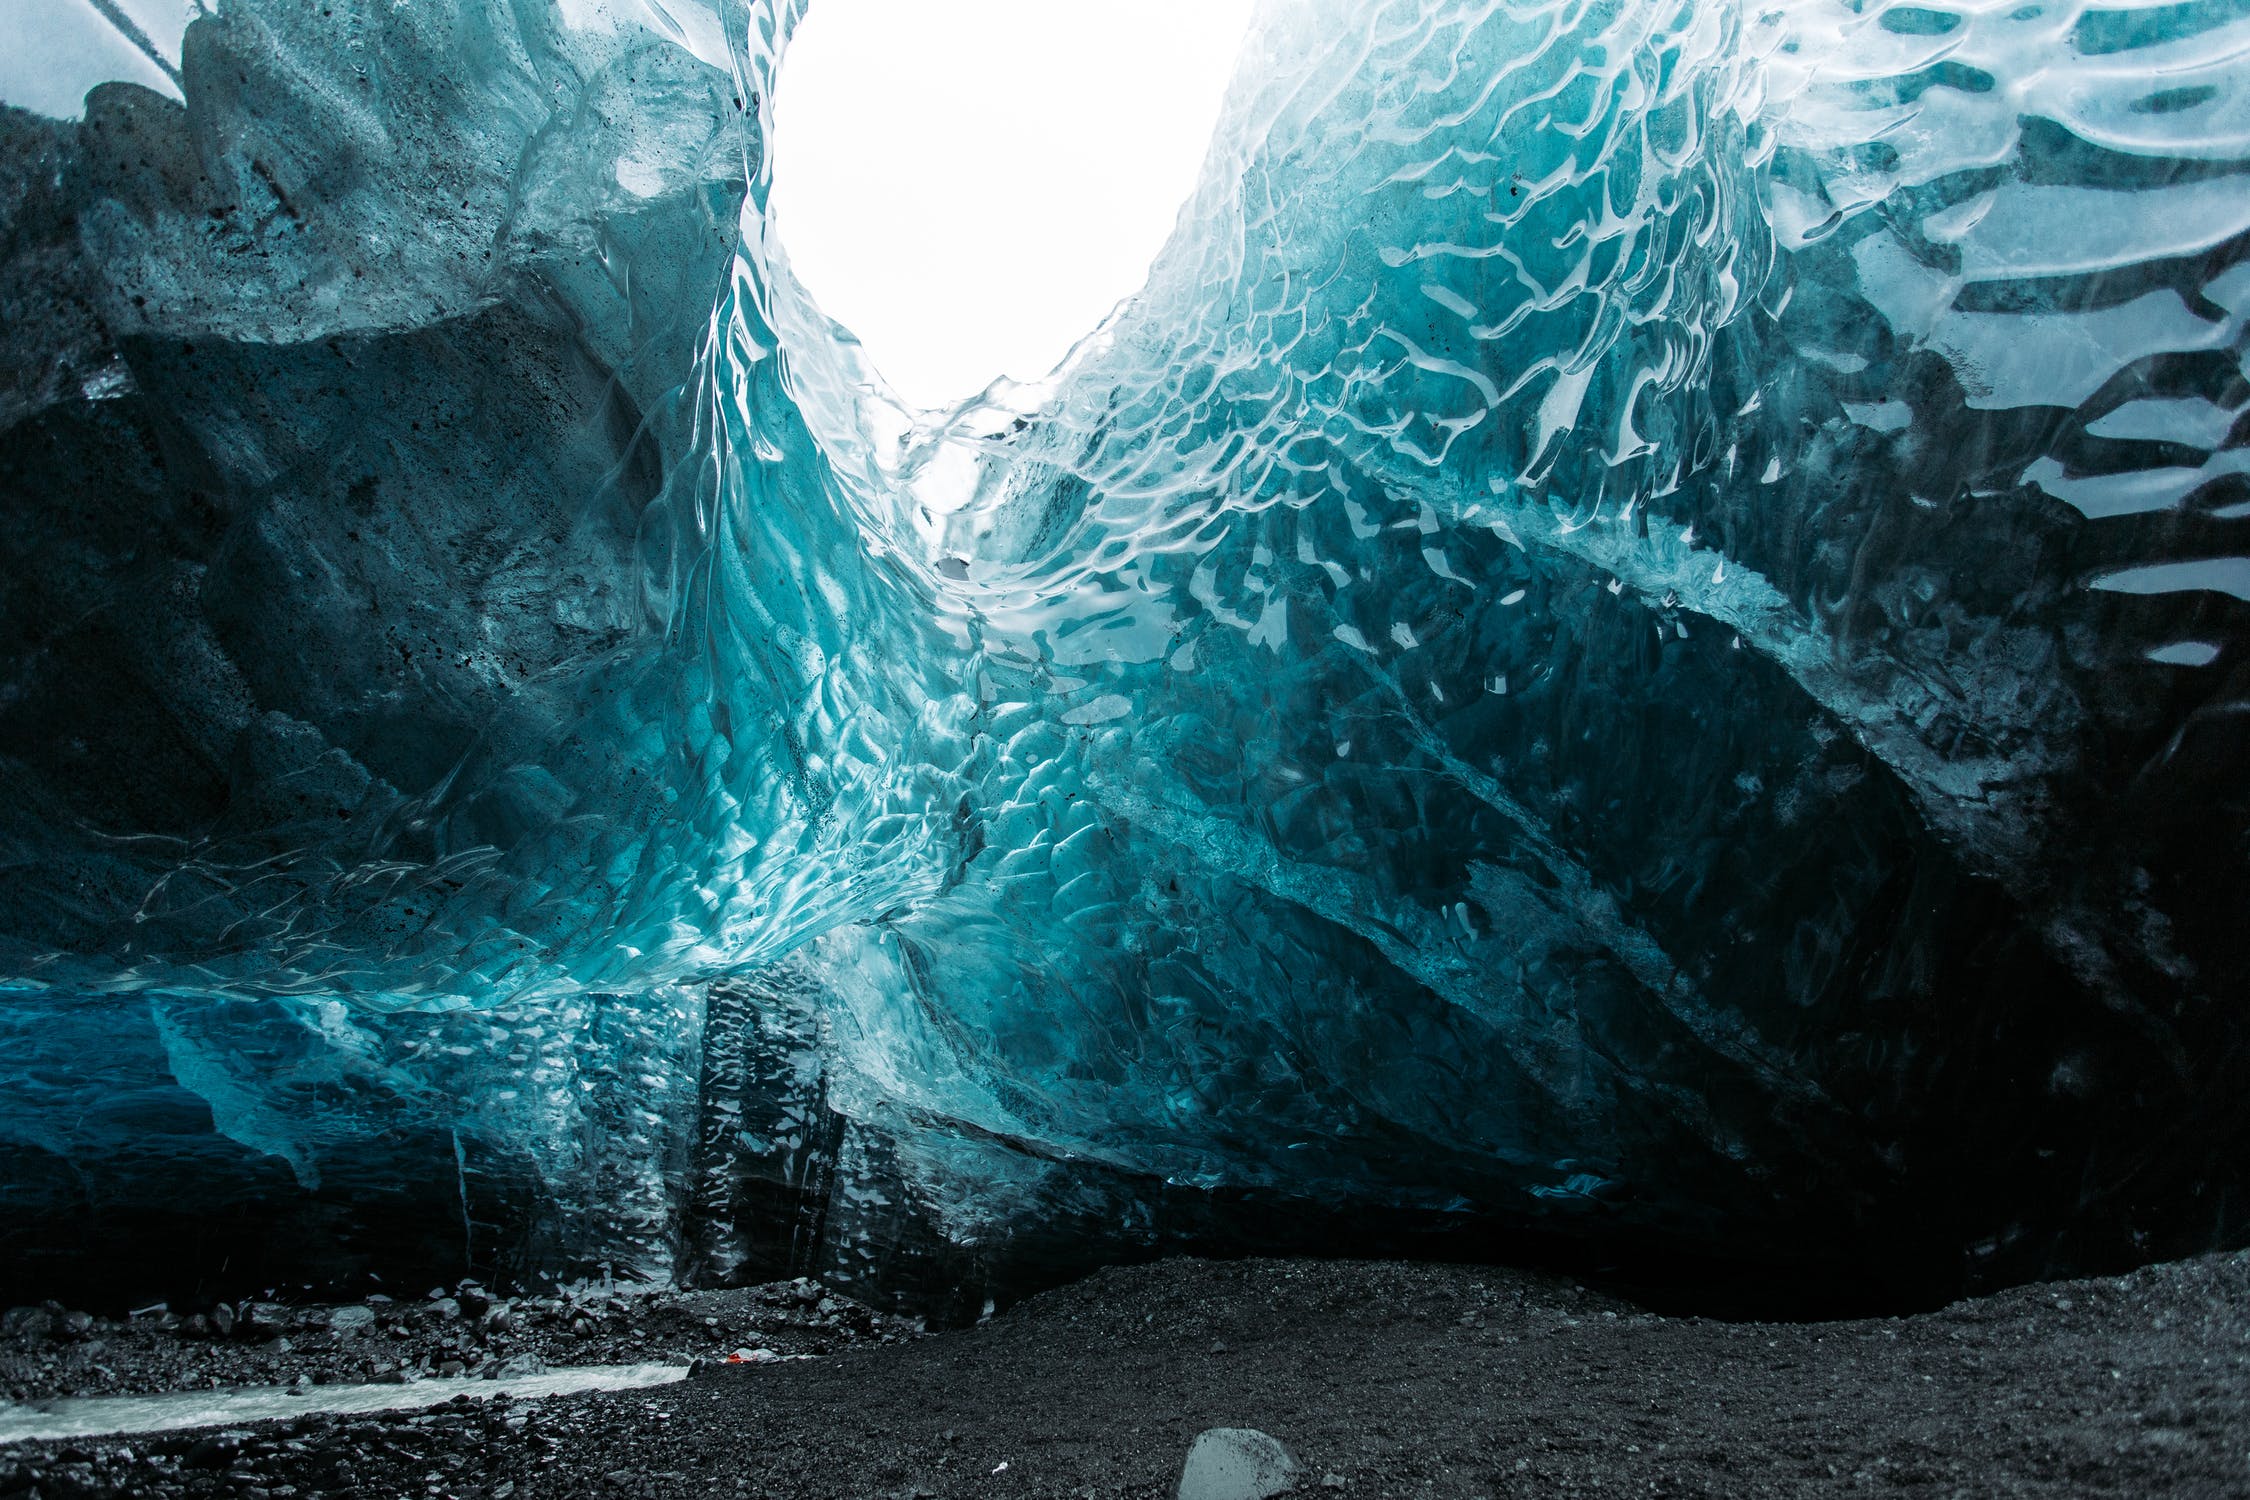 360 Virtual Tour of the Mendenhall Glacier Ice Caves